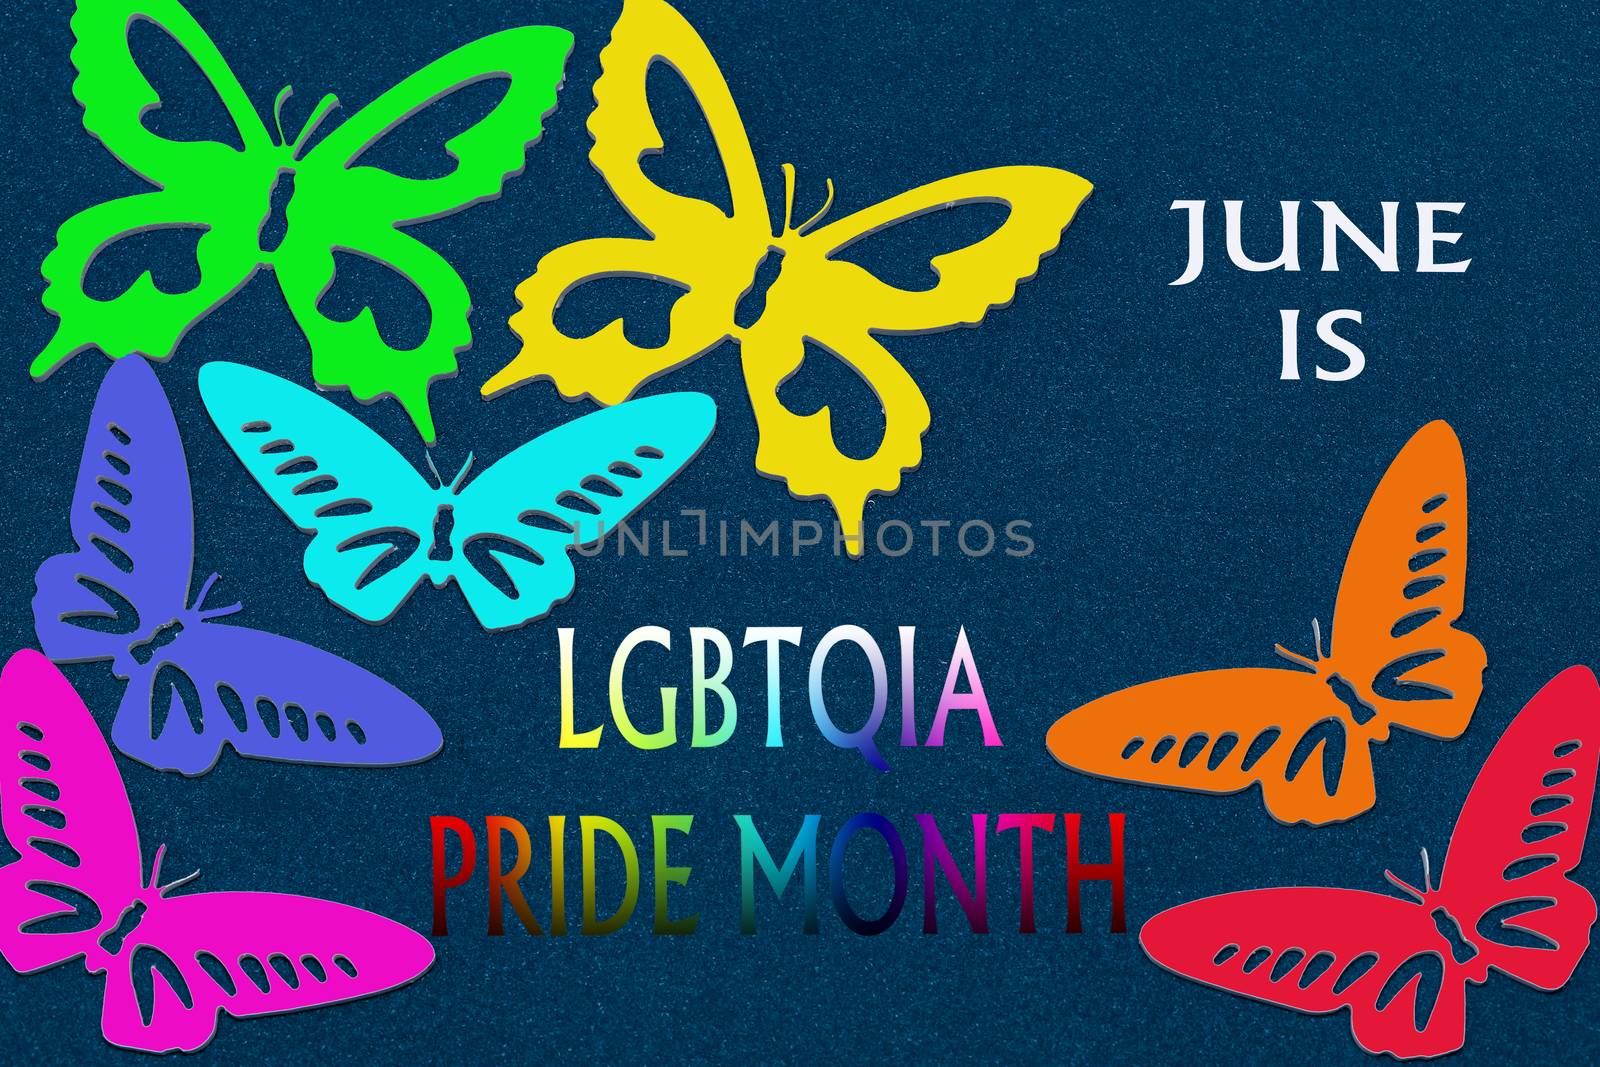 June is LGBTQIA pride month. Greeting text and rainbow-colored butterflies on a blue background.